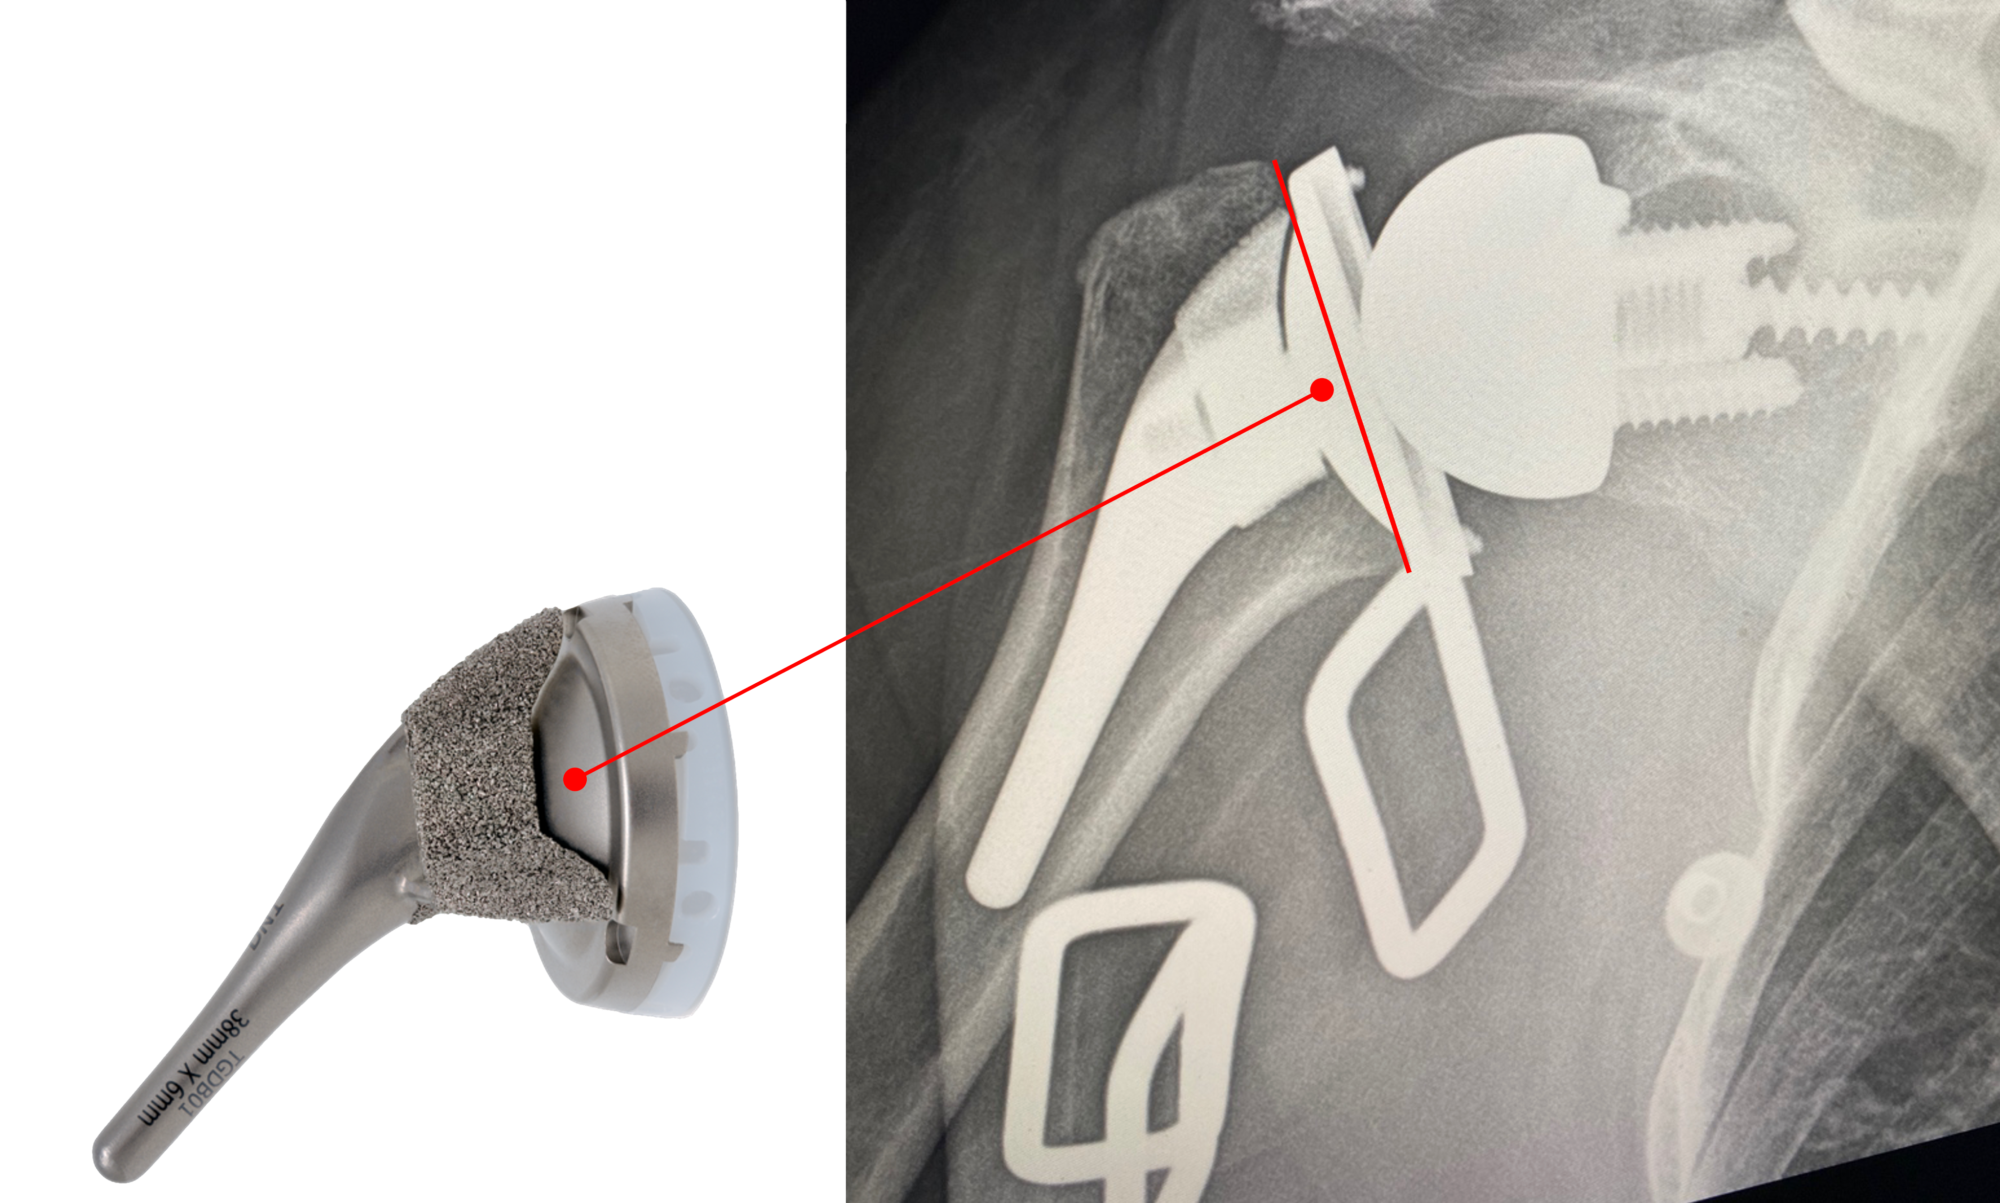 The InSet™ Bowl is placed within the metaphysis